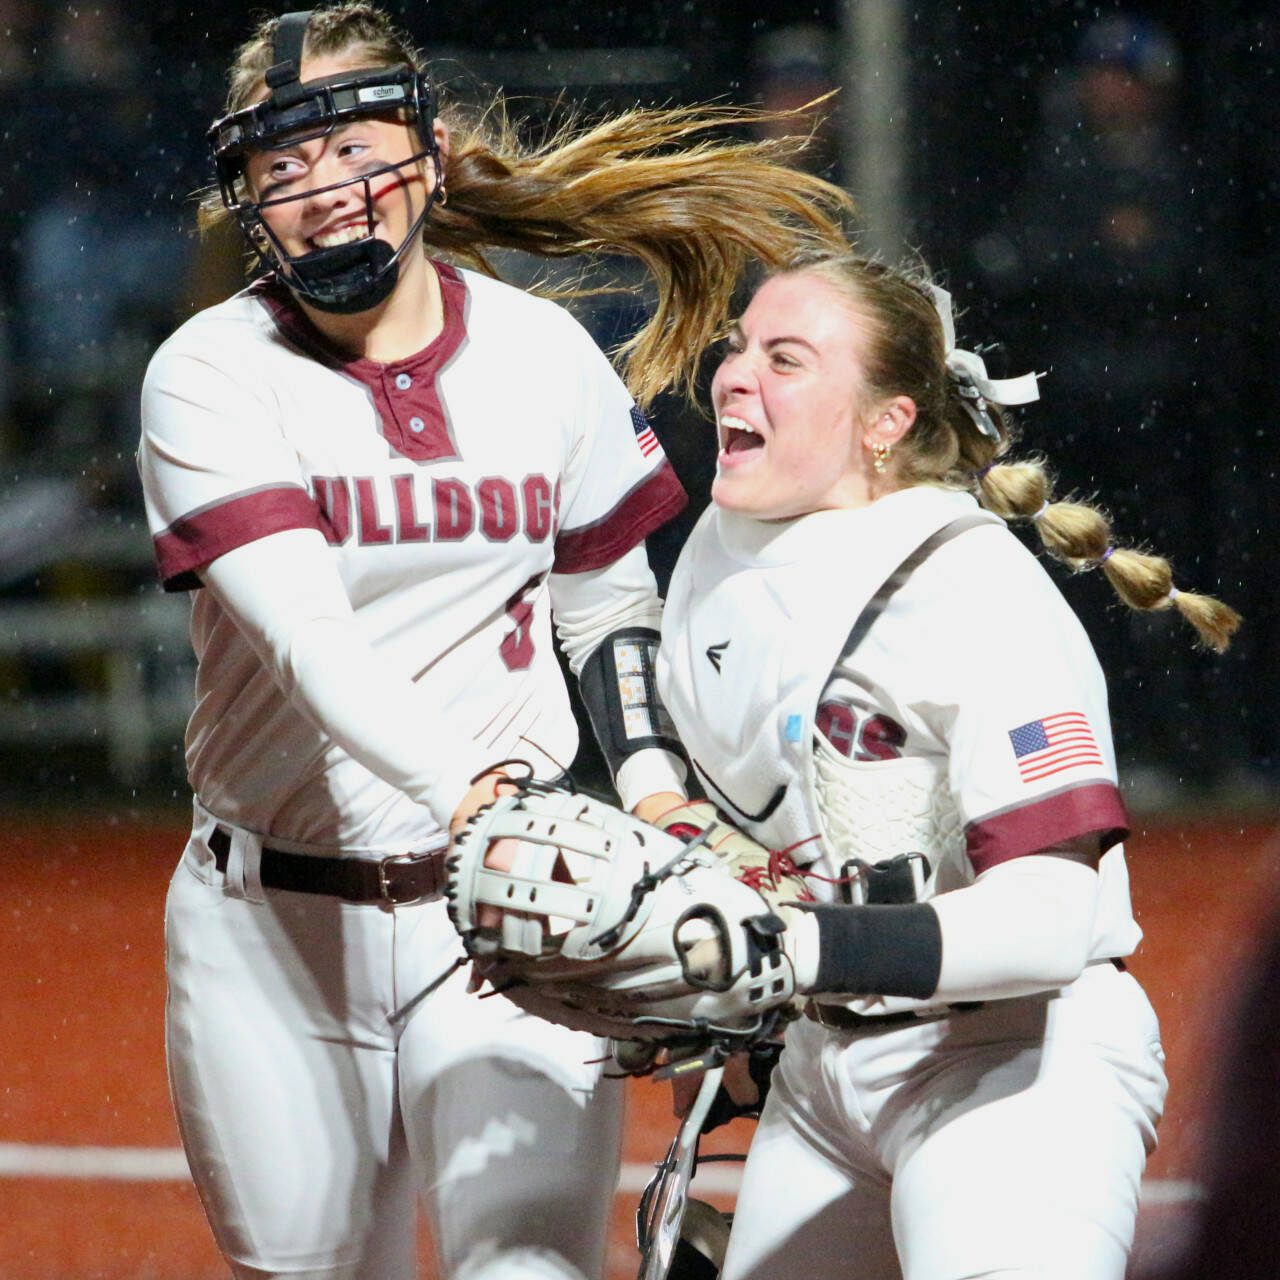 RYAN SPARKS | THE DAILY WORLD 
Montesano pitcher Grace Gooding, left, and catcher Ali Parkin celebrate a pickoff play during a 7-3 win over Rochester Saturday night at Dick Tagman Field in Montesano.